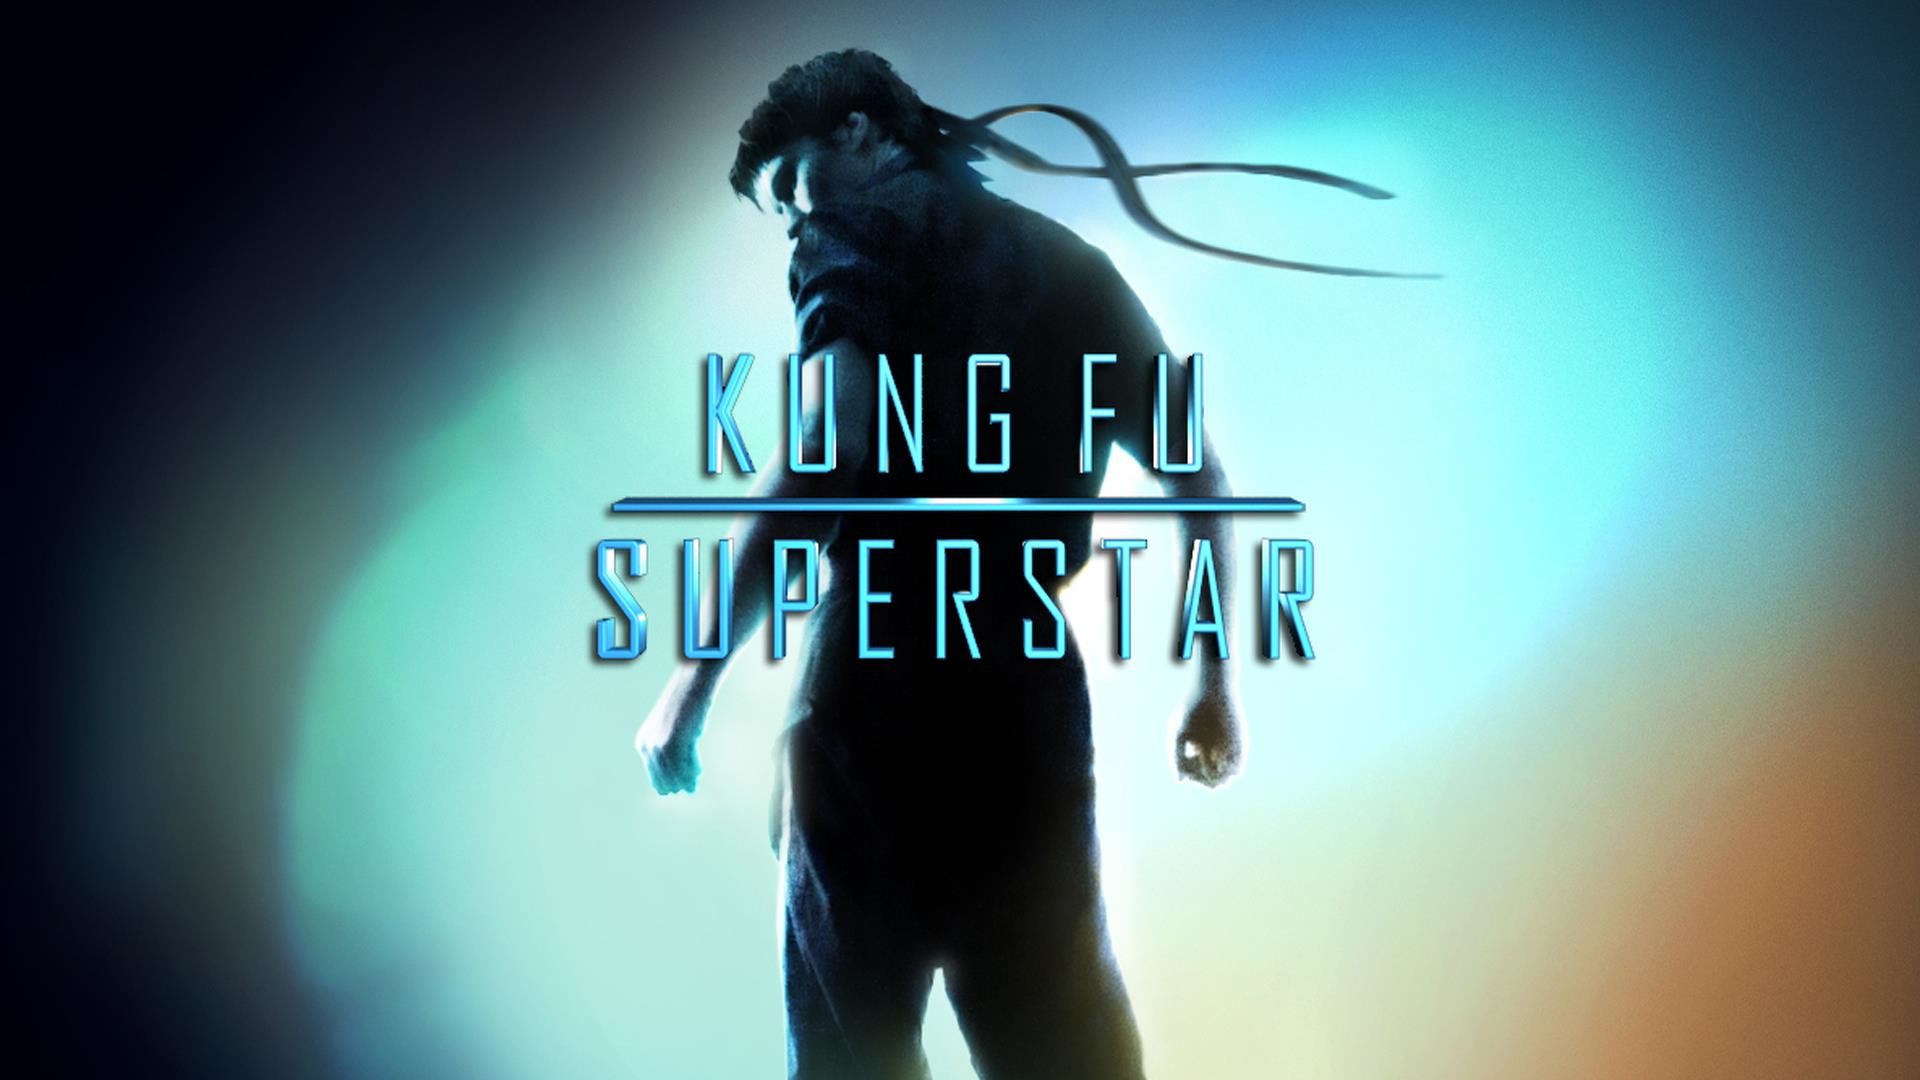 1920x1080 Kung Fu Superstar HD Wallpaper | Background Image |  | ID:269408 -  Wallpaper Abyss